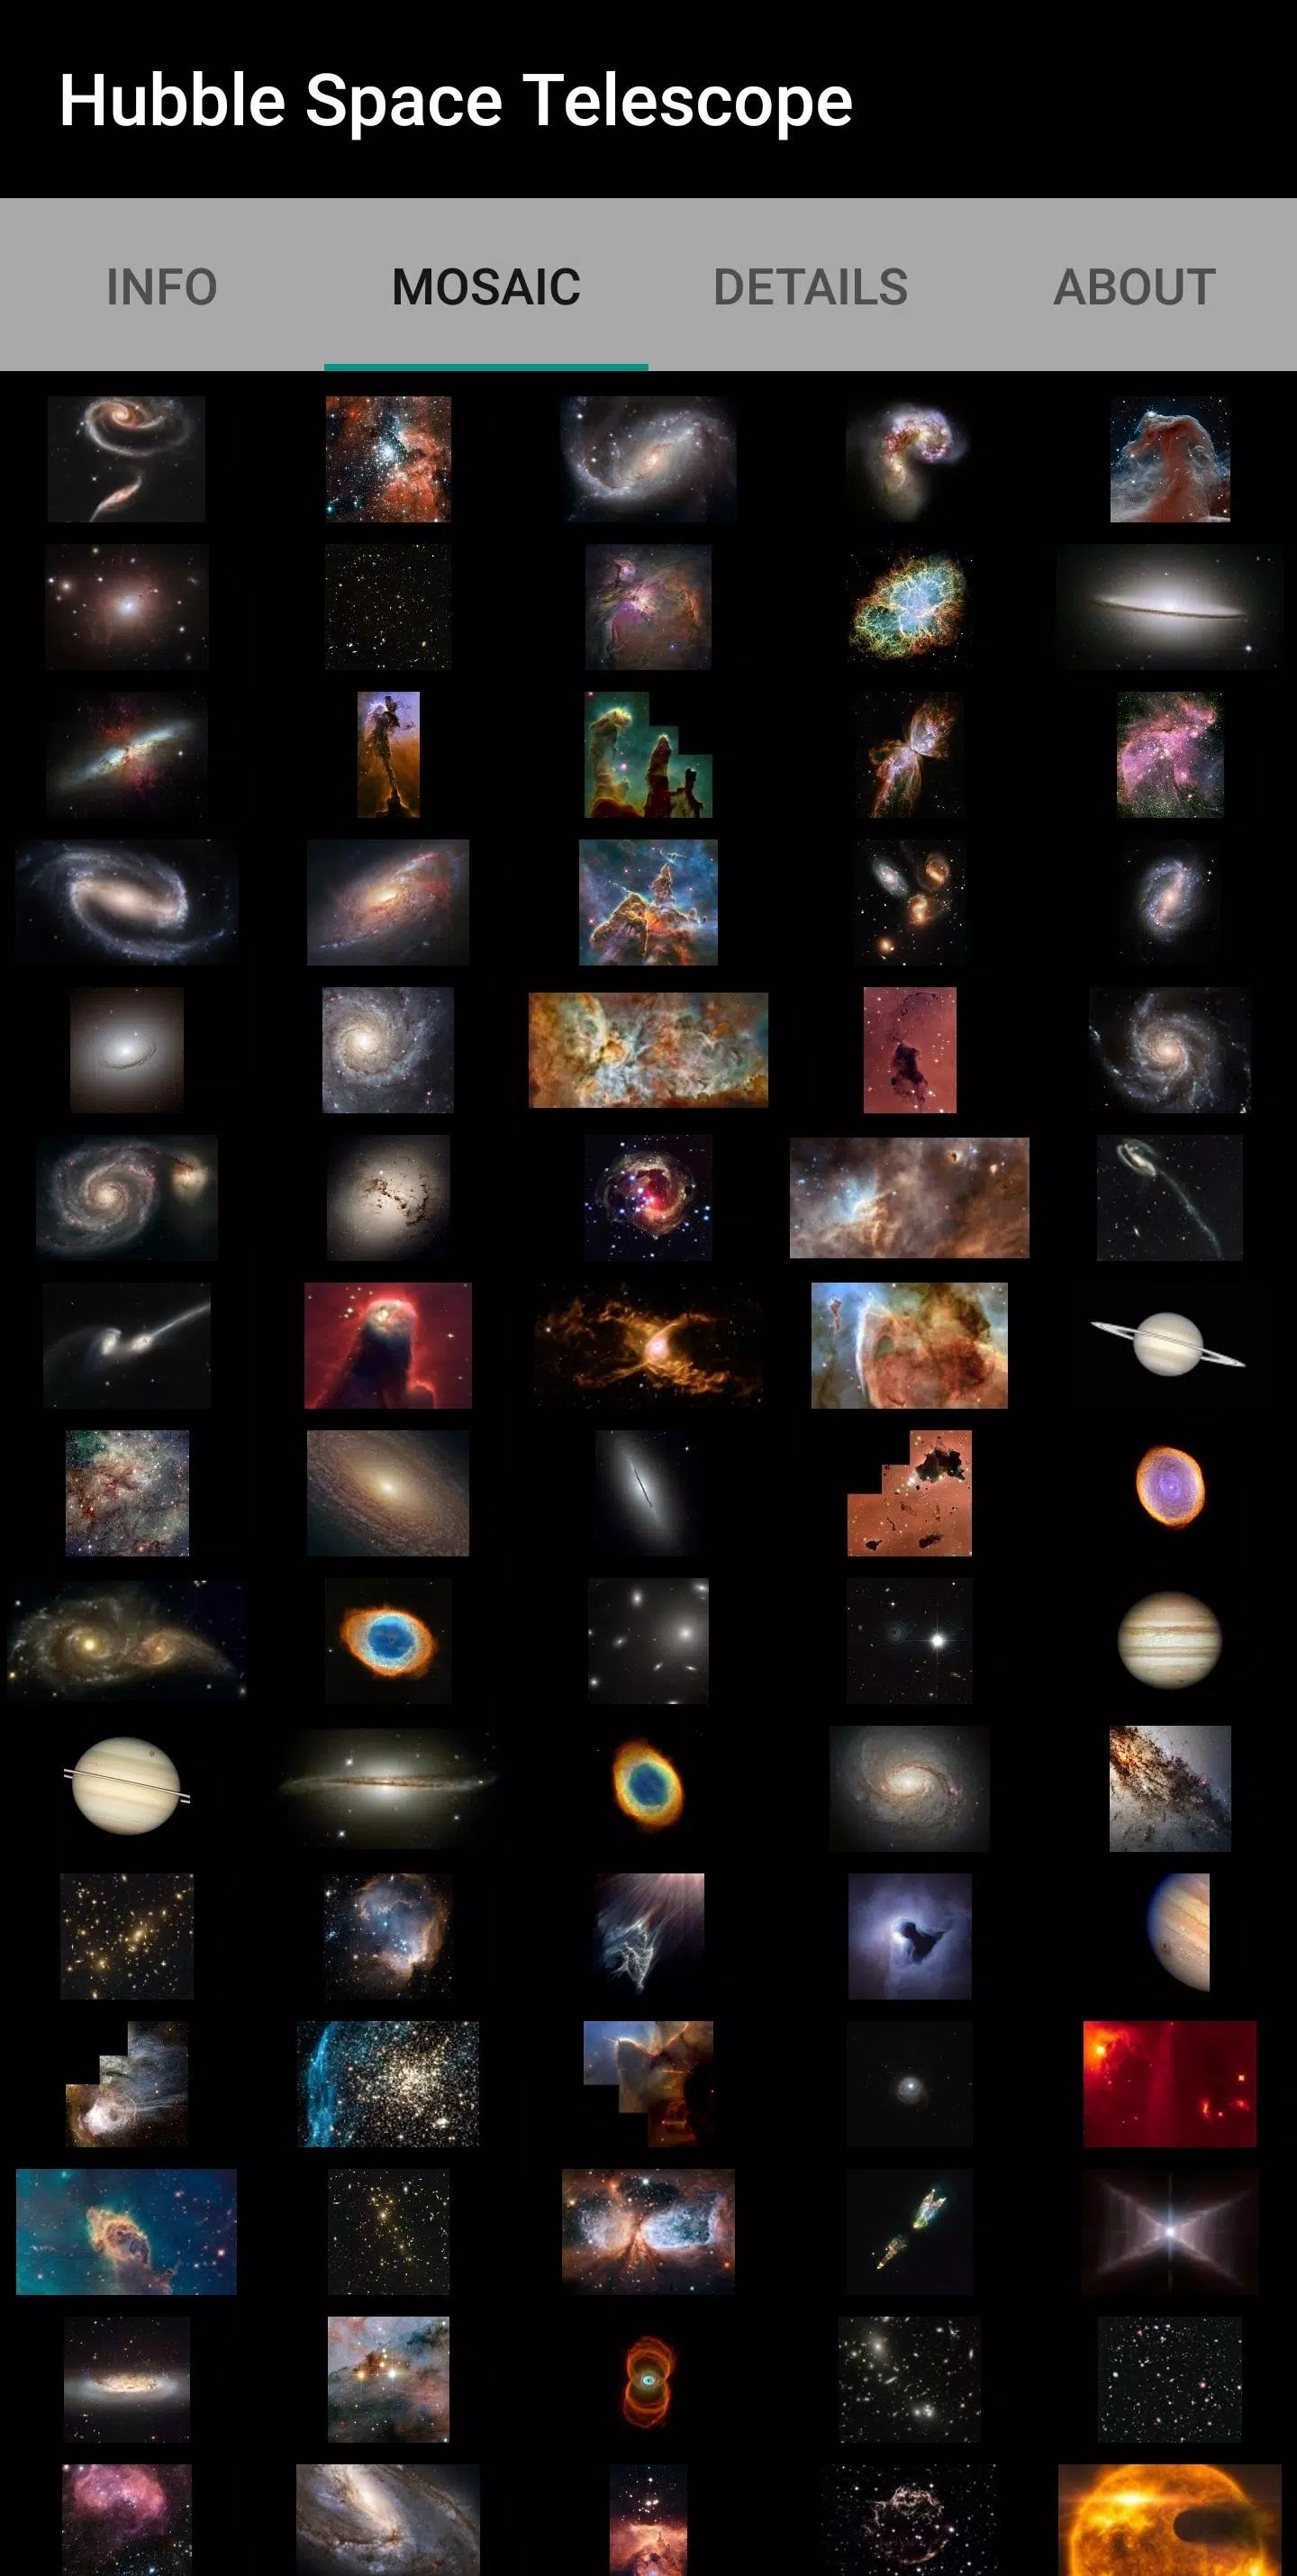 Hubble Space Telescope for Android - APK Download